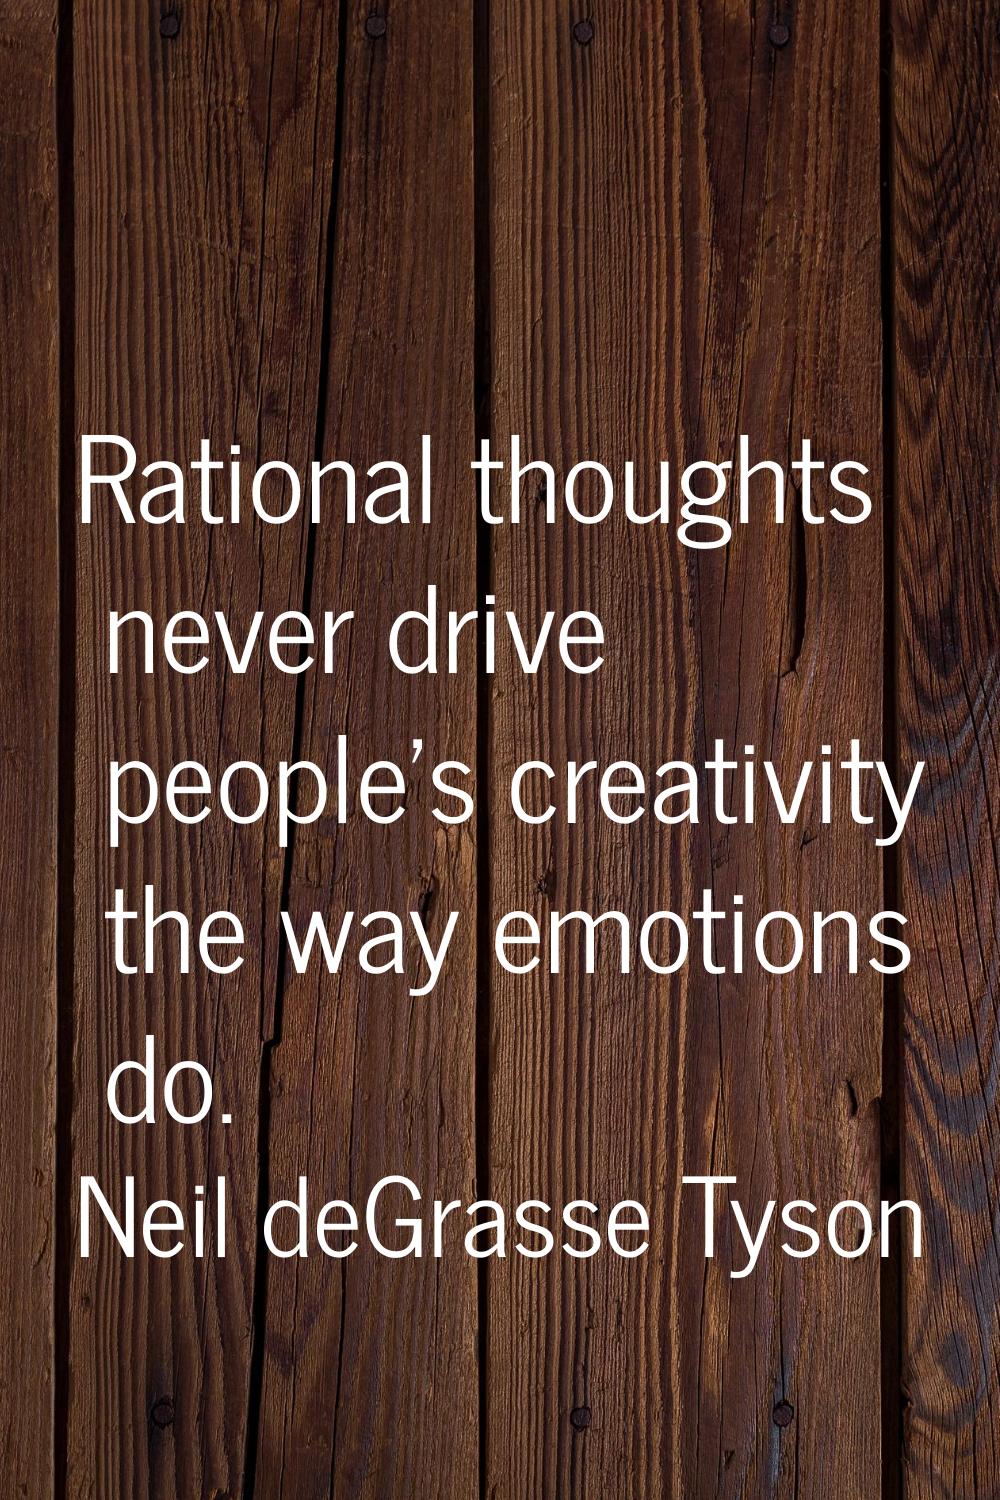 Rational thoughts never drive people's creativity the way emotions do.